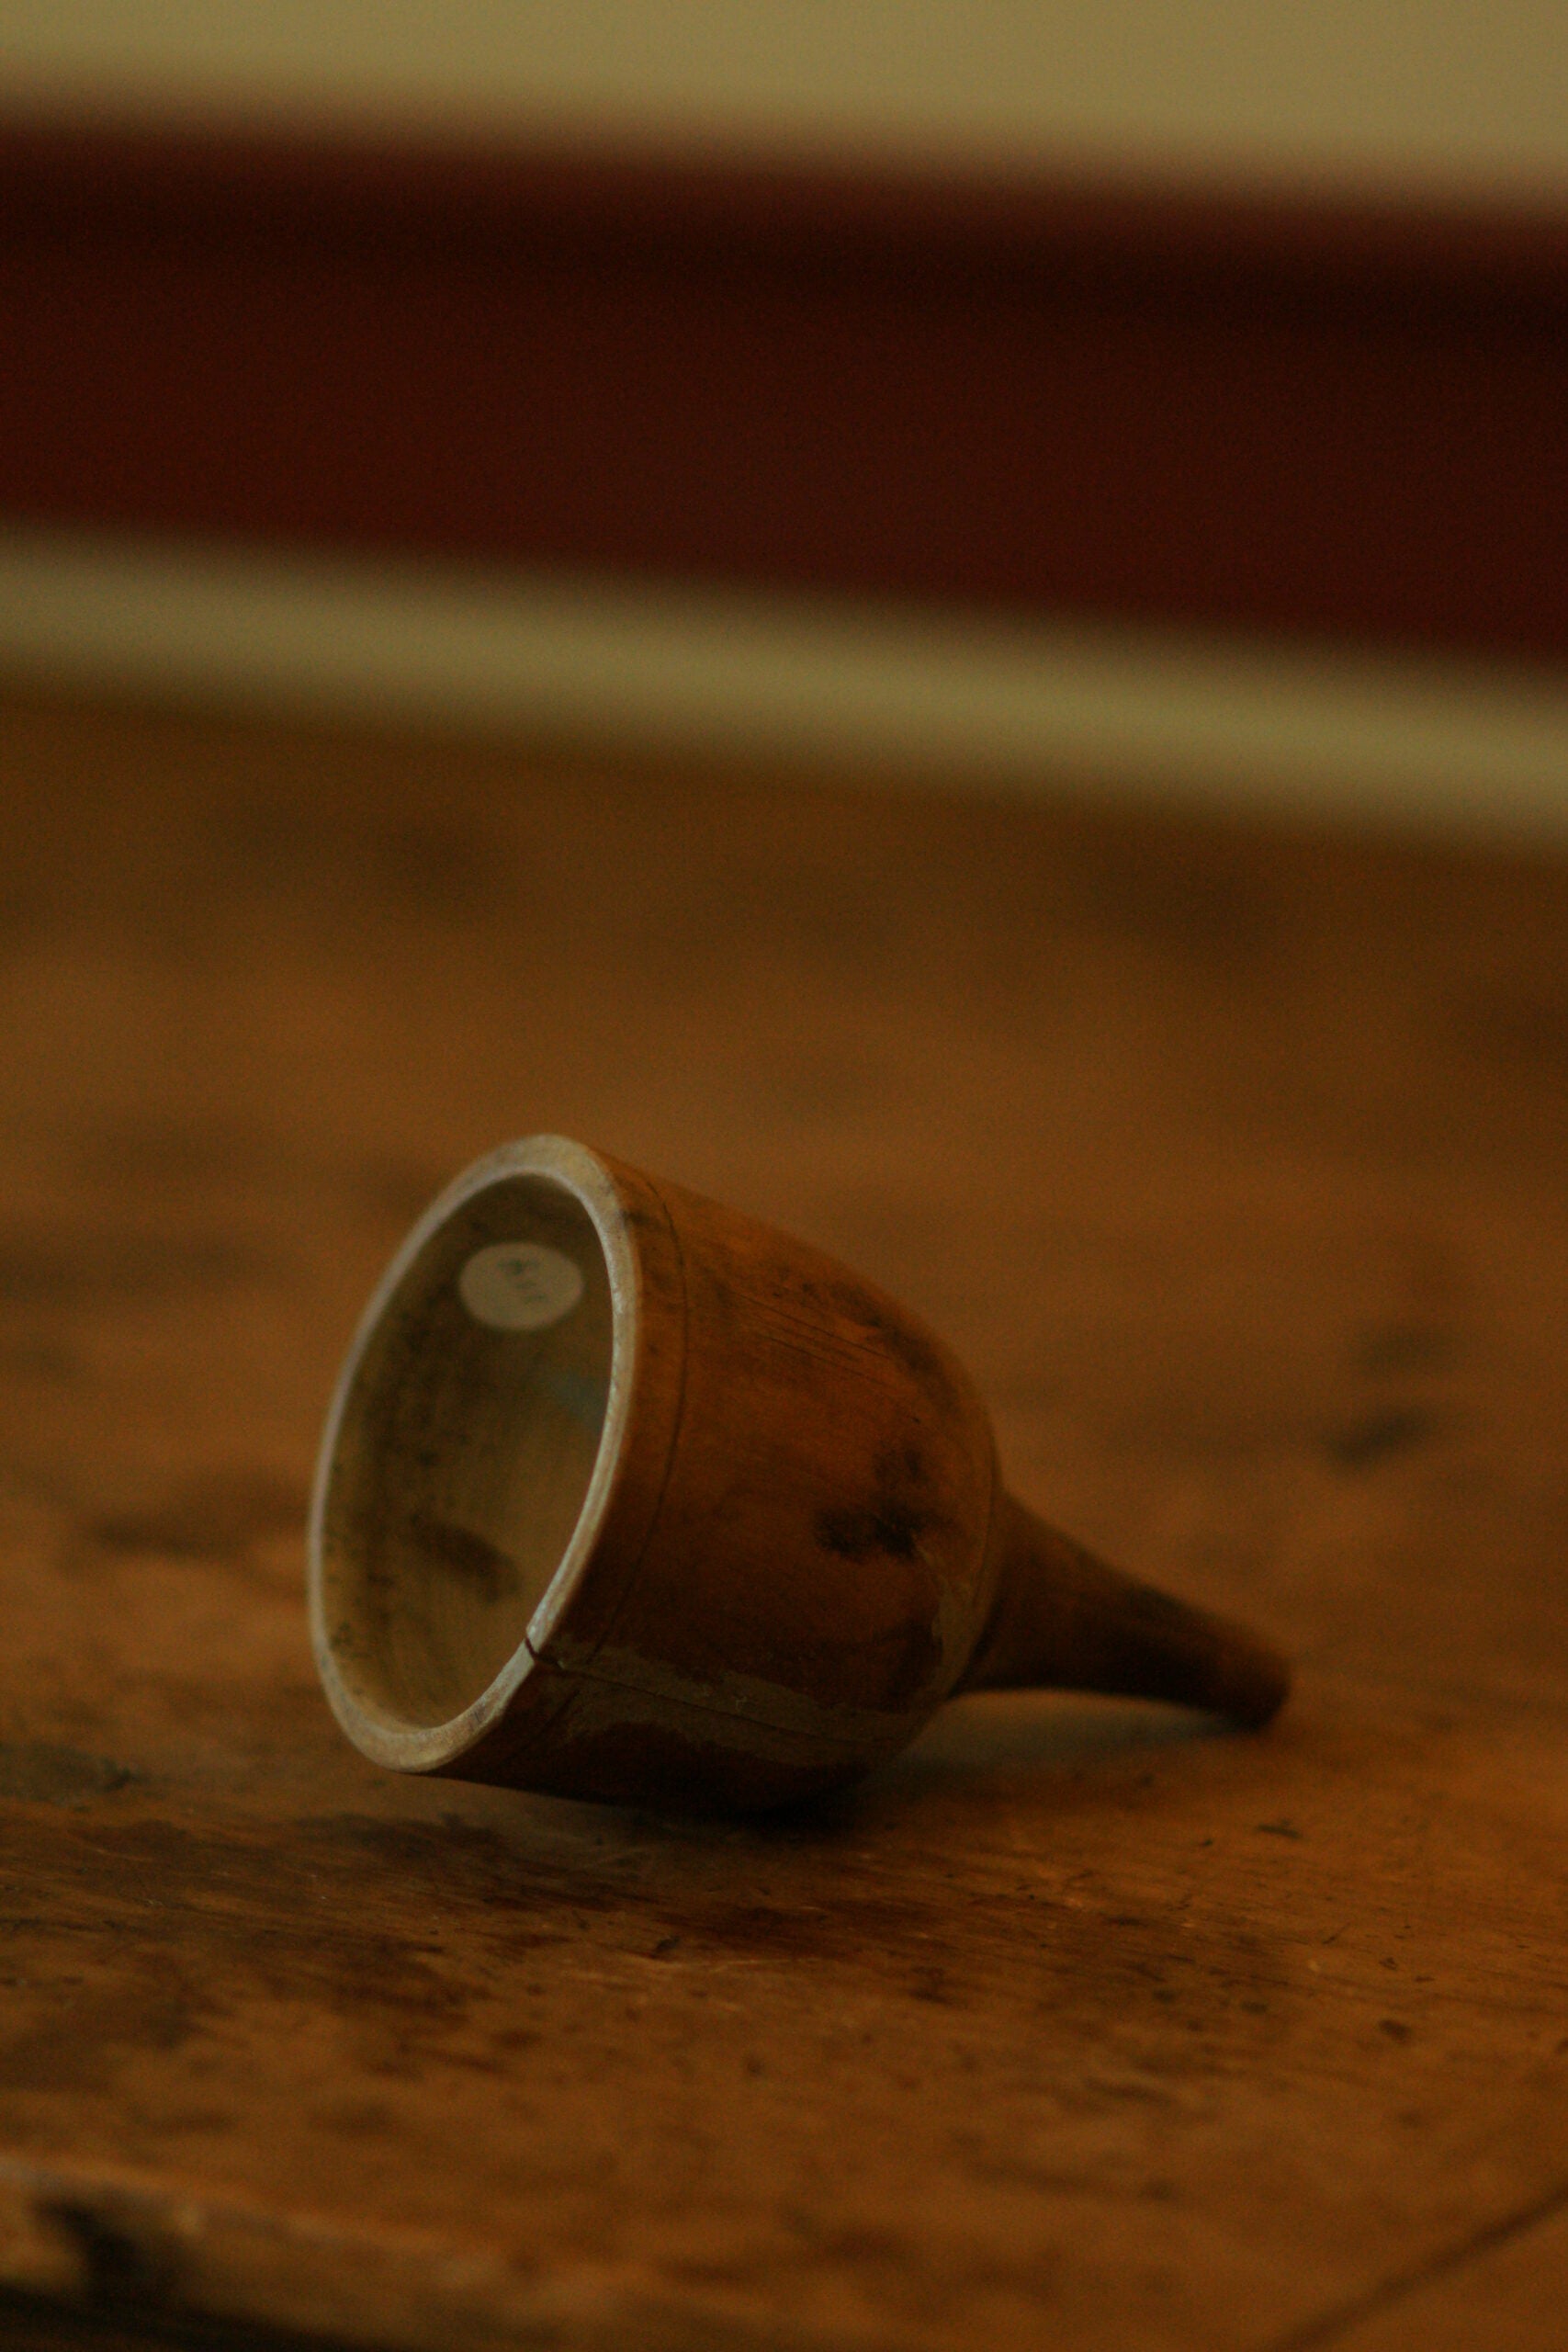 A wooden funnel, shaped like a bell, sits on it's side on a wooden counter